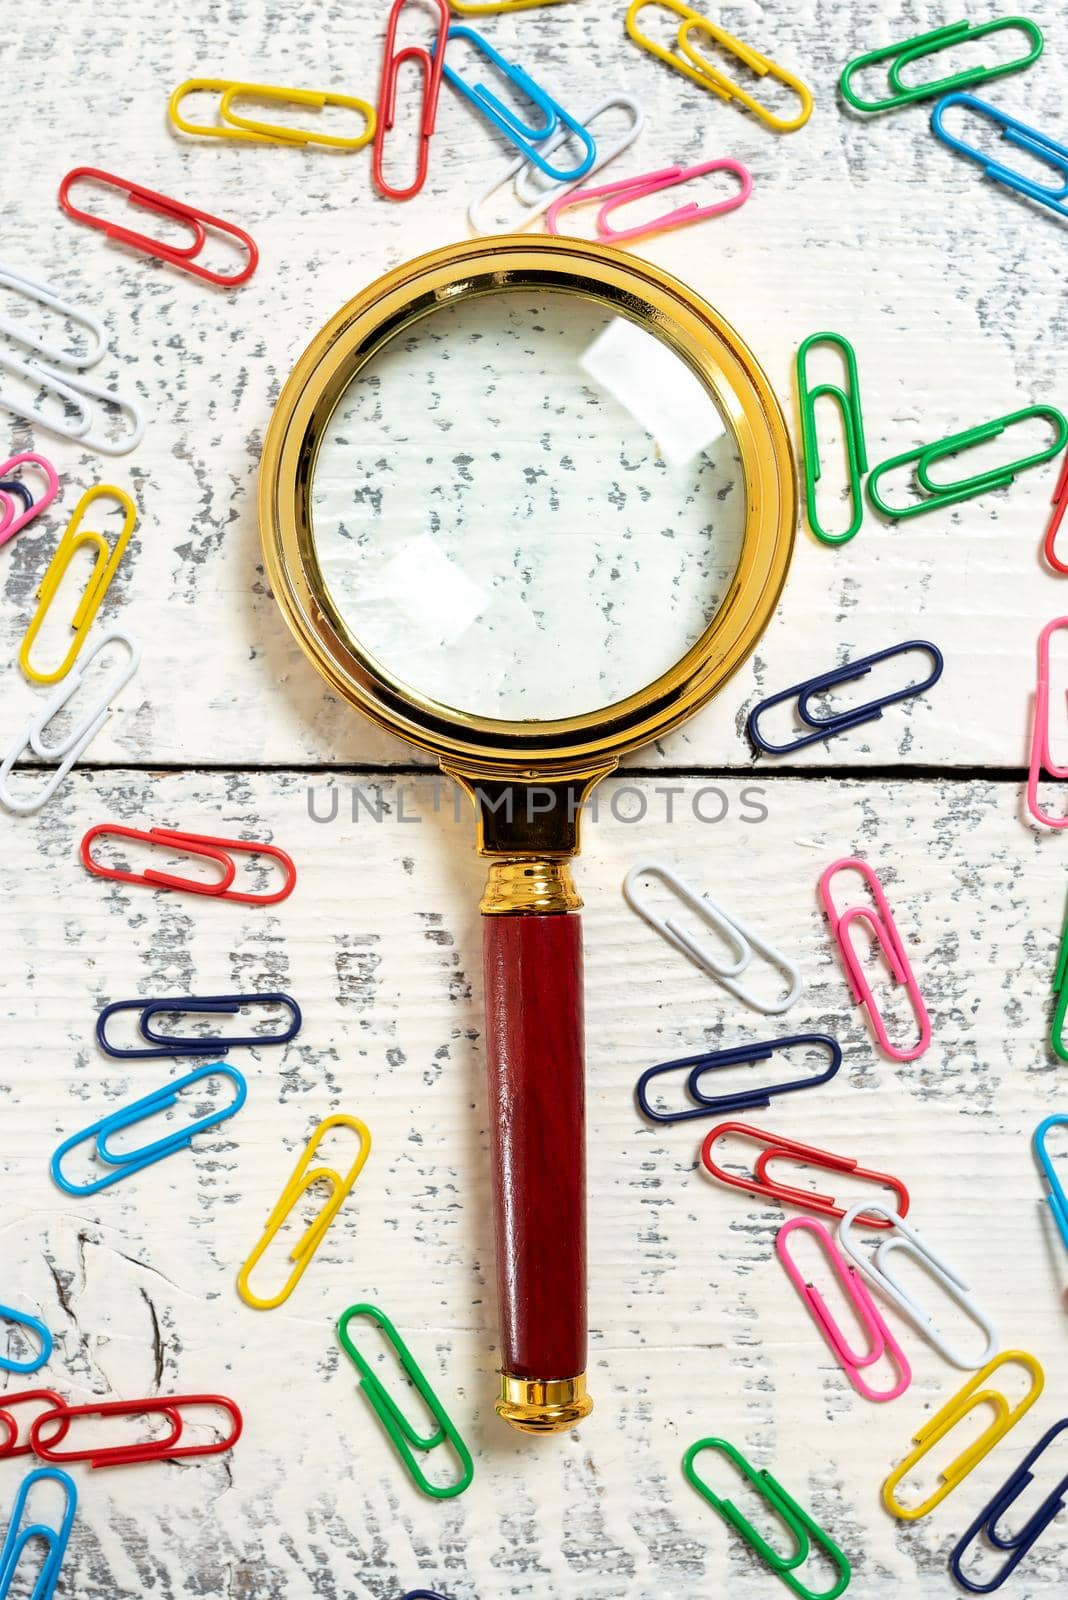 Magnifier With Important Message With Paperclips Around On Floor. Magnifying Glass With Crutial Data With Clips All Over. Optical Instrument Showing New Ideas. by nialowwa